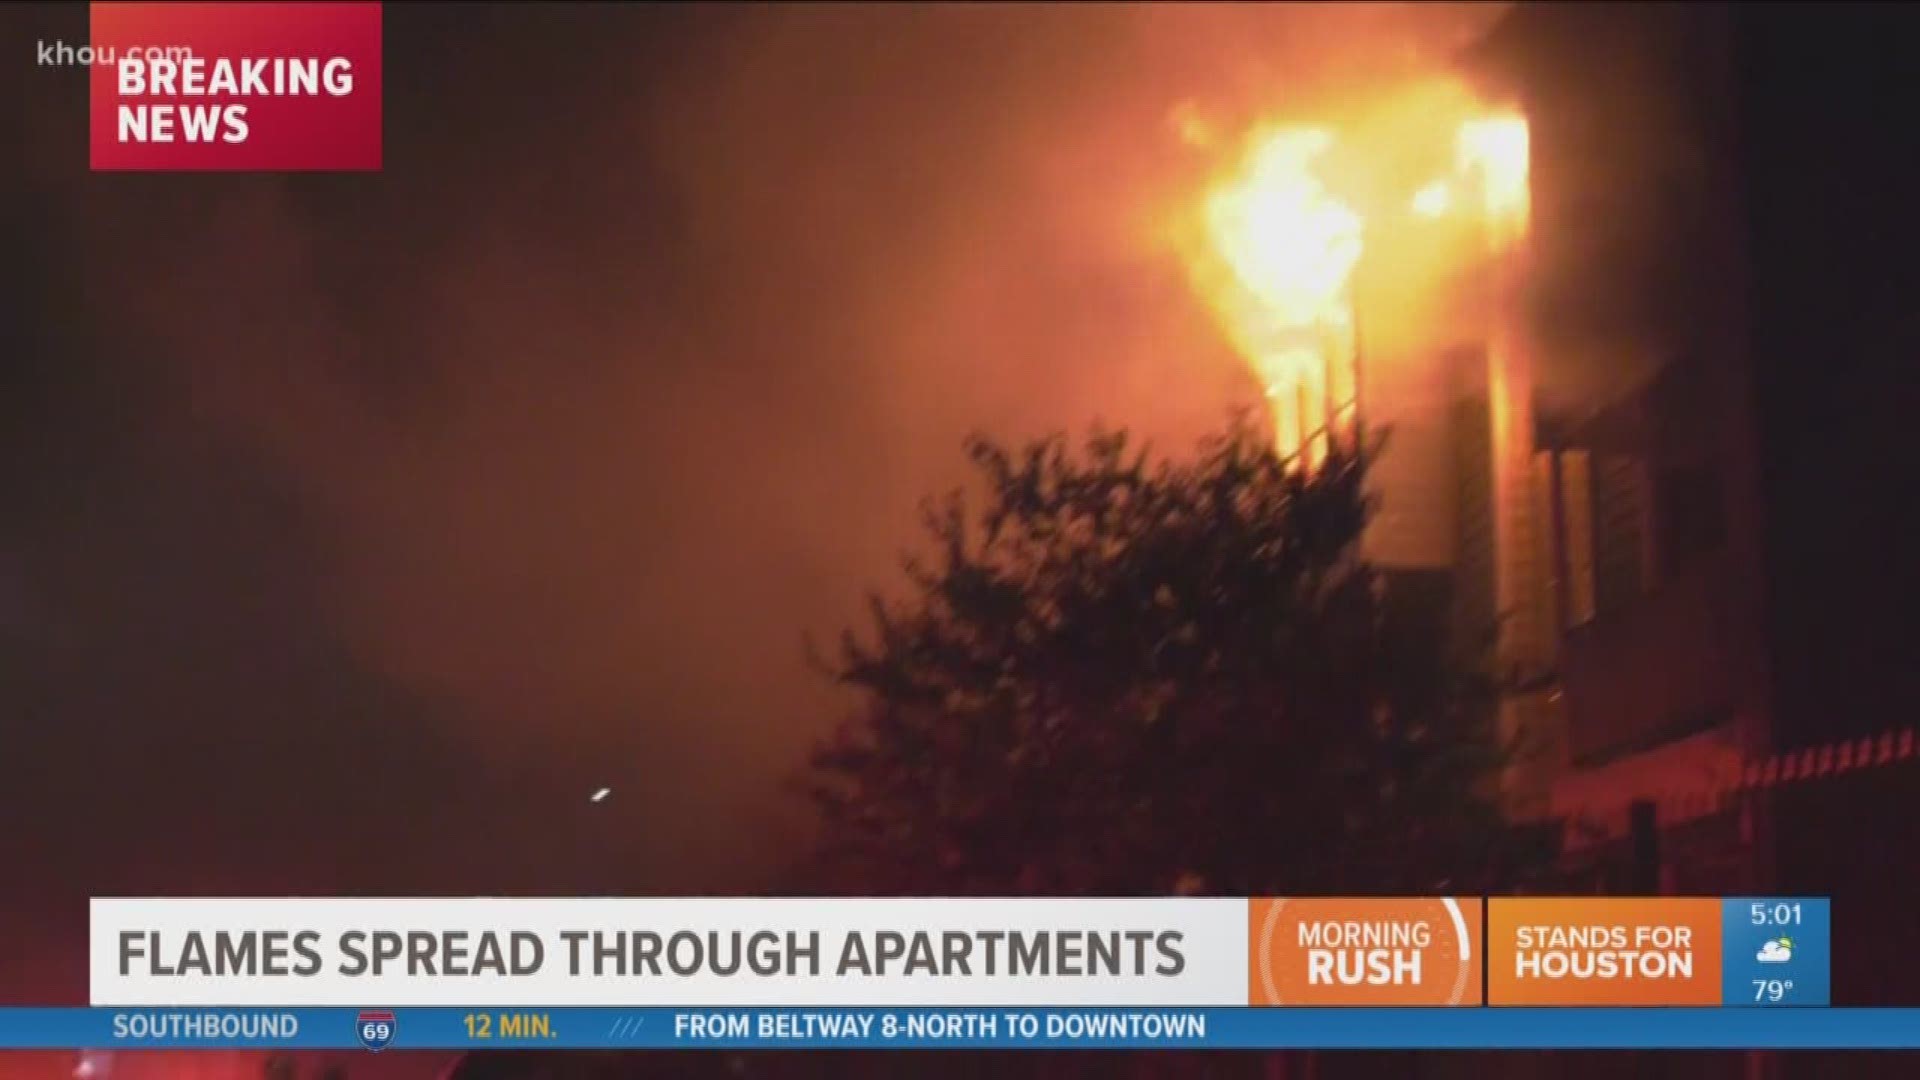 Residents got a terrifying wake-up call when an apartment fire in southwest spread to surrounding units overnight.